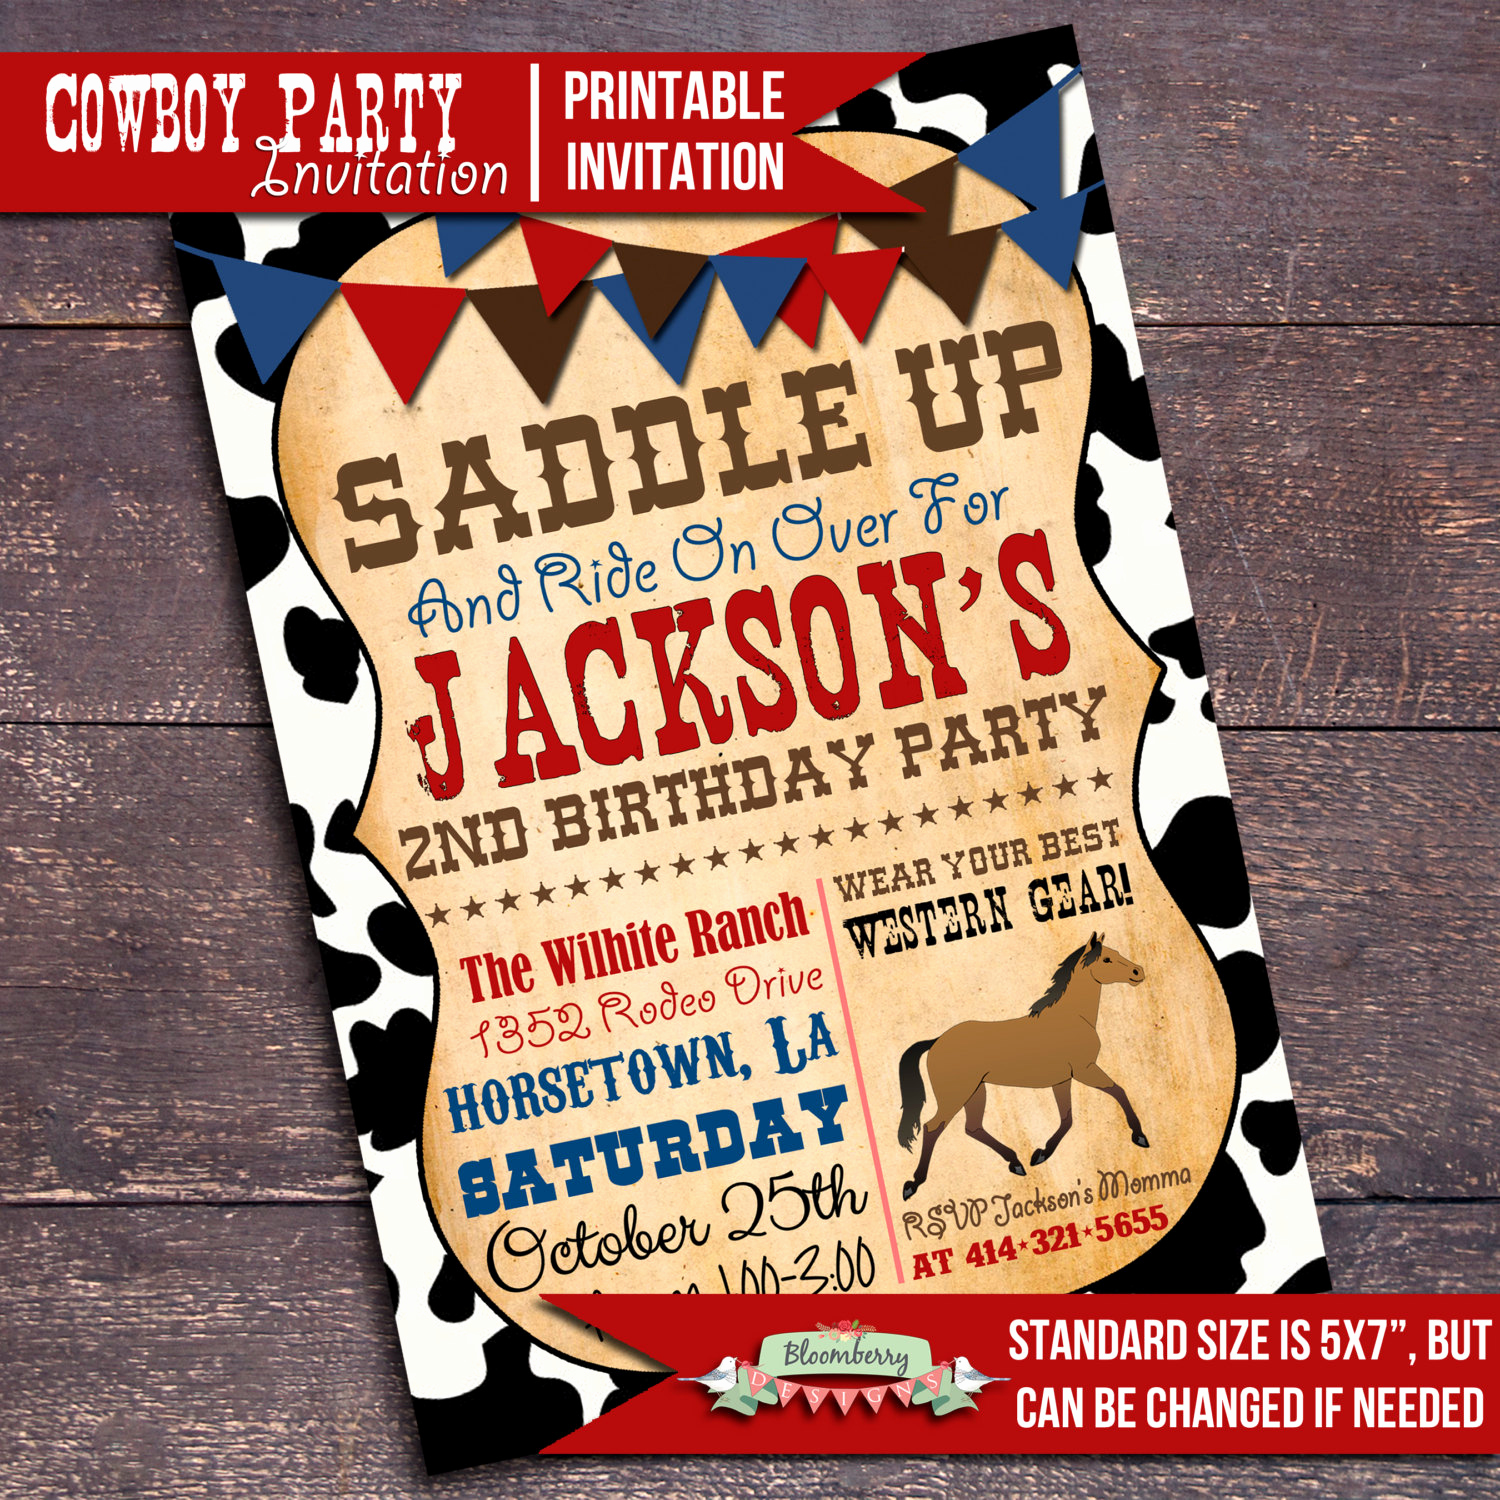 Western themed Invitation Wording Unique Printable Cowboy Party Invitation Western by Bloomberrydesigns